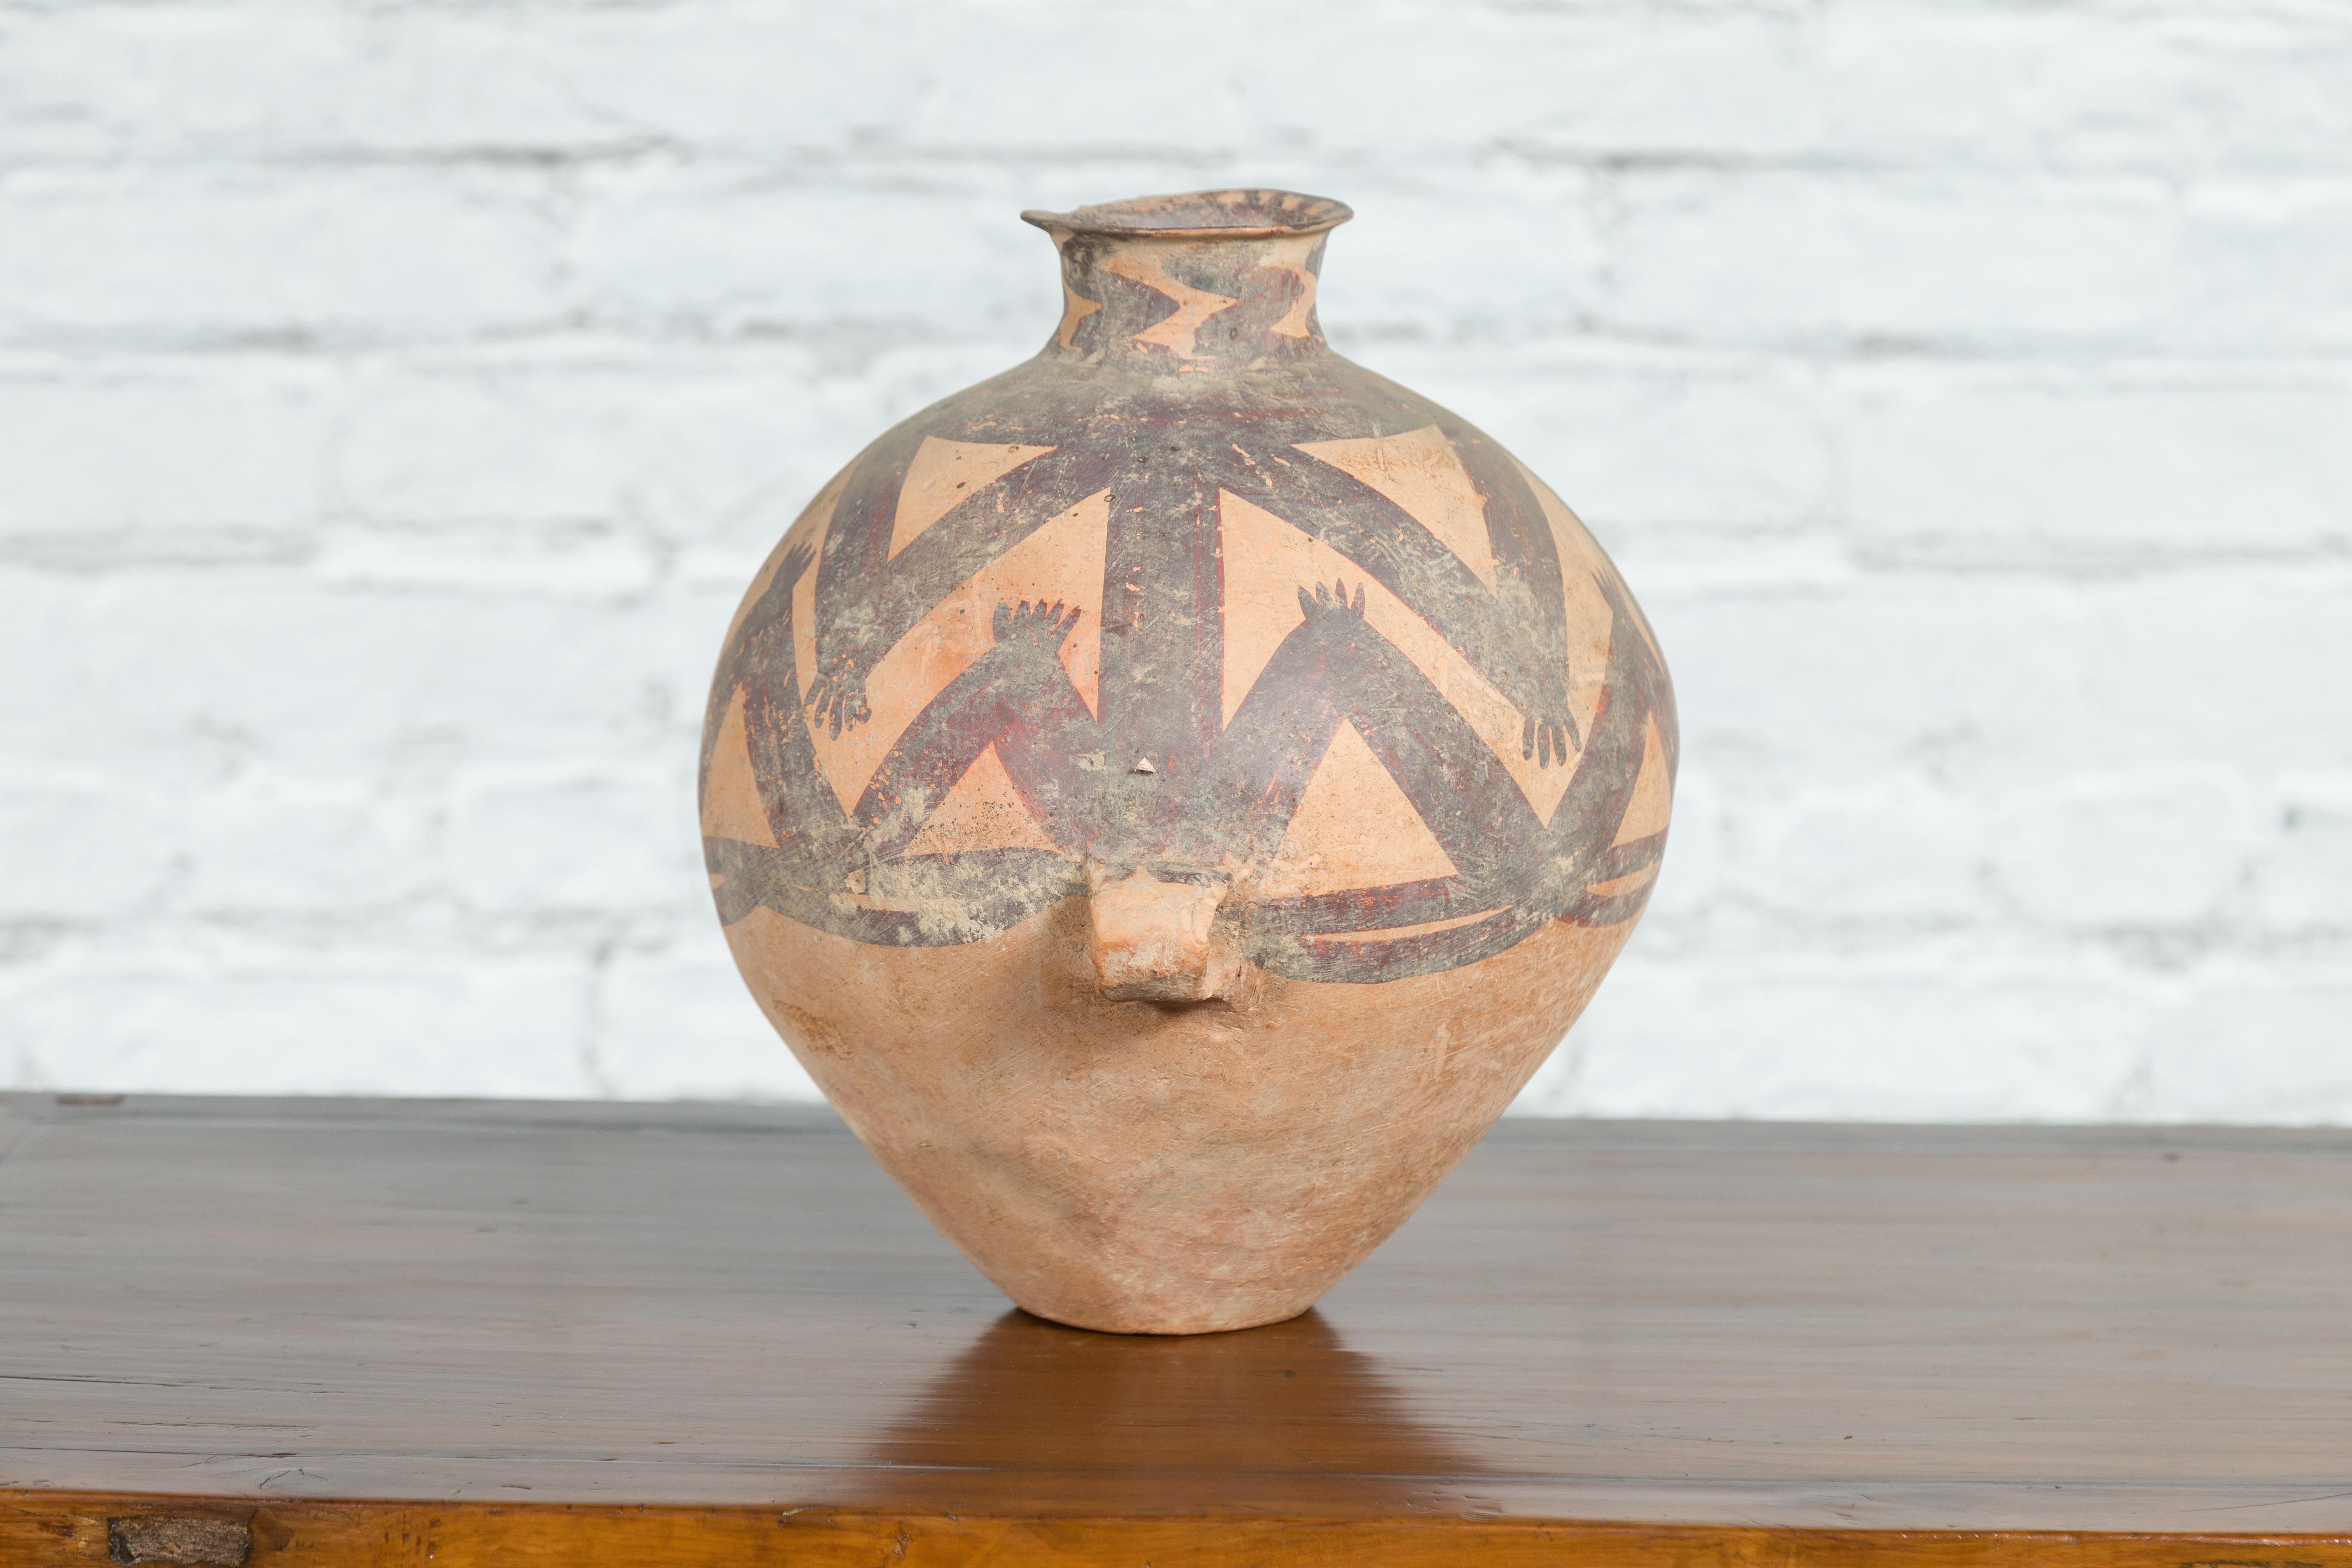 Chinese Neolithic Period 4000 BC Terracotta Storage Jar with Geometric Décor 6